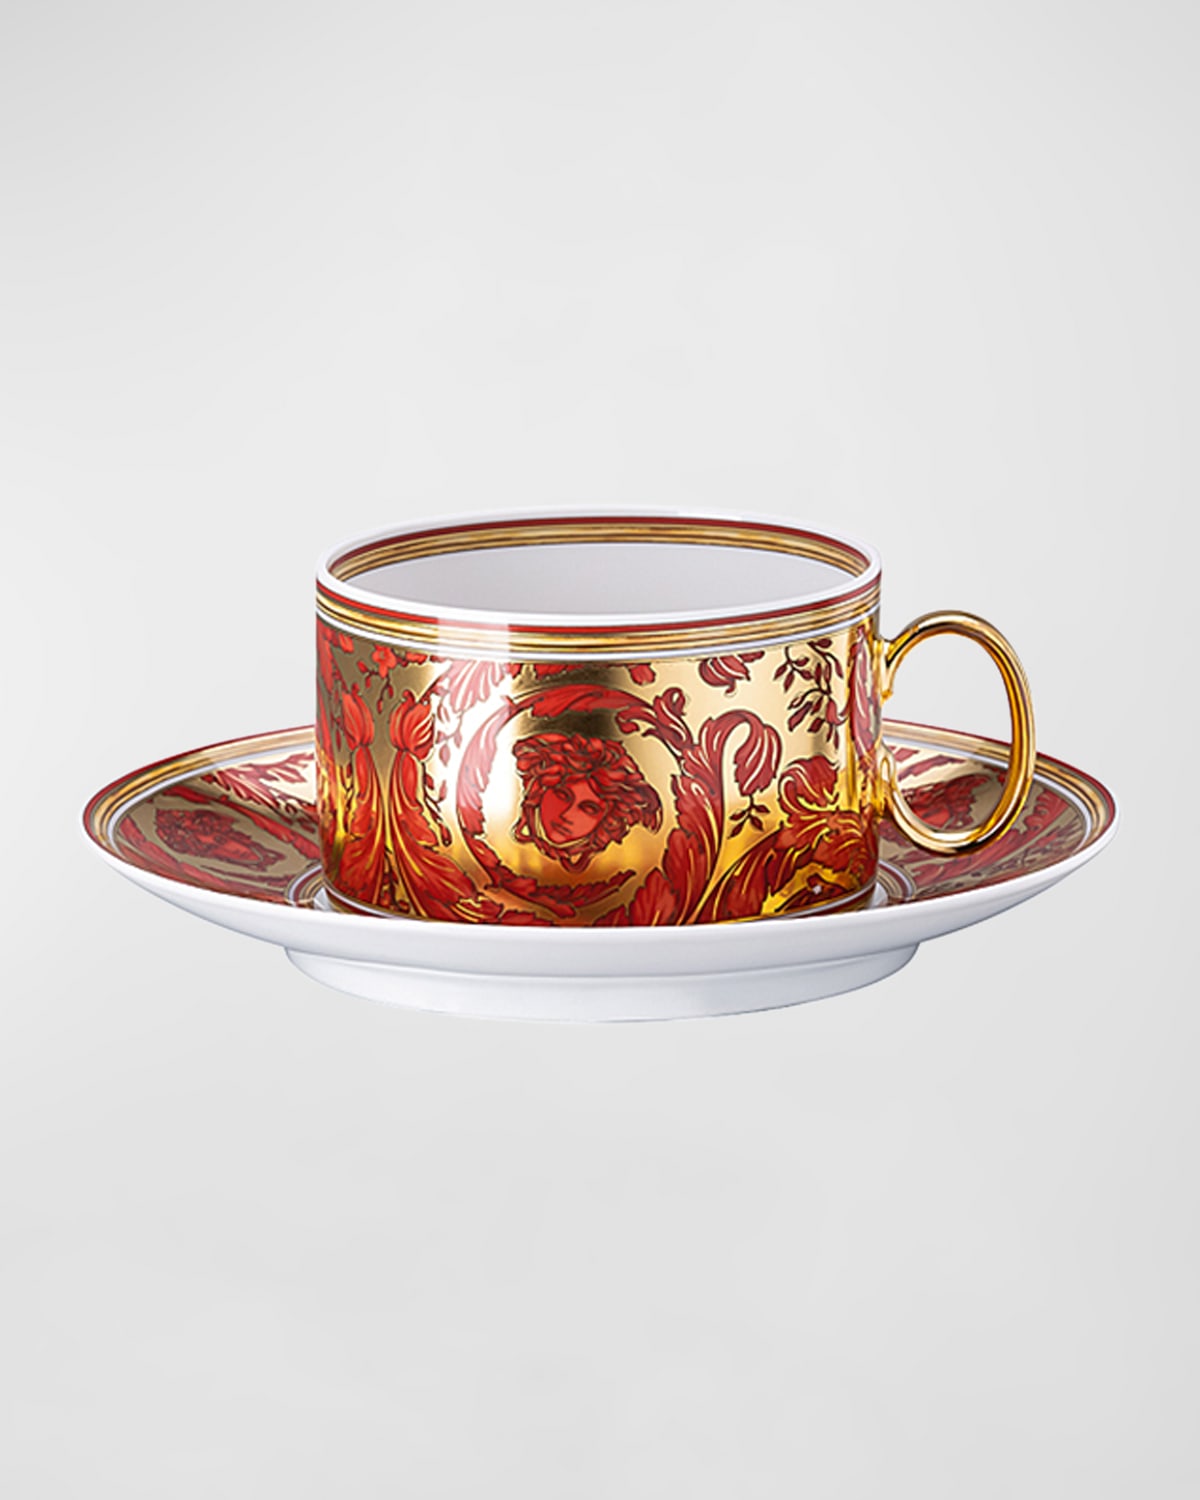 Versace Medusa Garland Red Tea Cup & Saucer, 7 Oz. In Red/gold